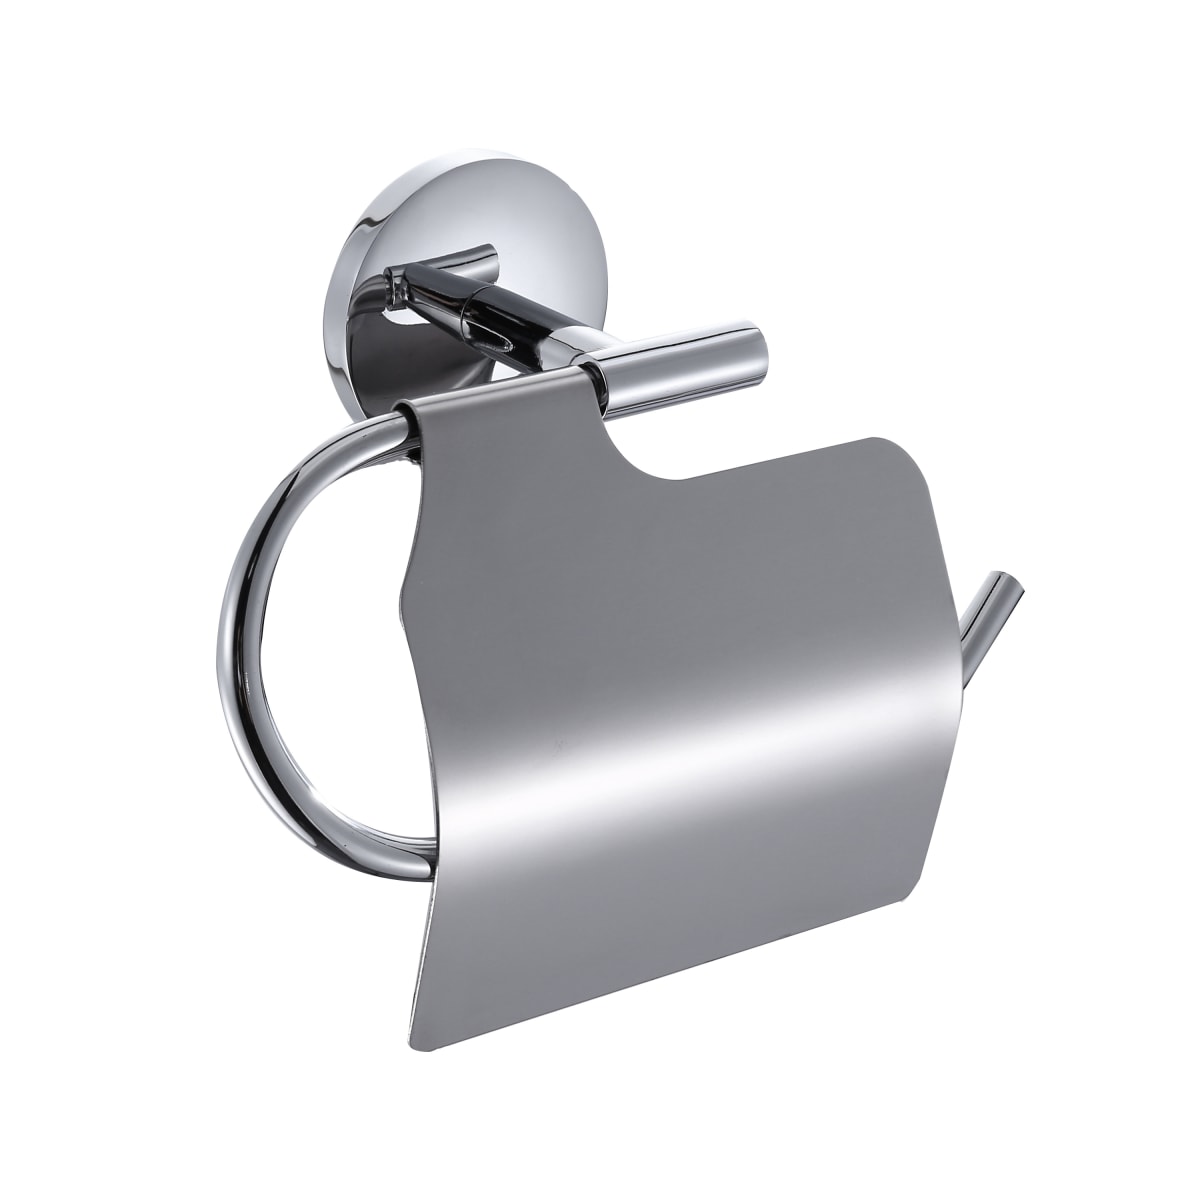 TOILET ROLL HOLDER COVERED WITH SCREWS OR ADHESIVE SUITE SENSEA CHROME